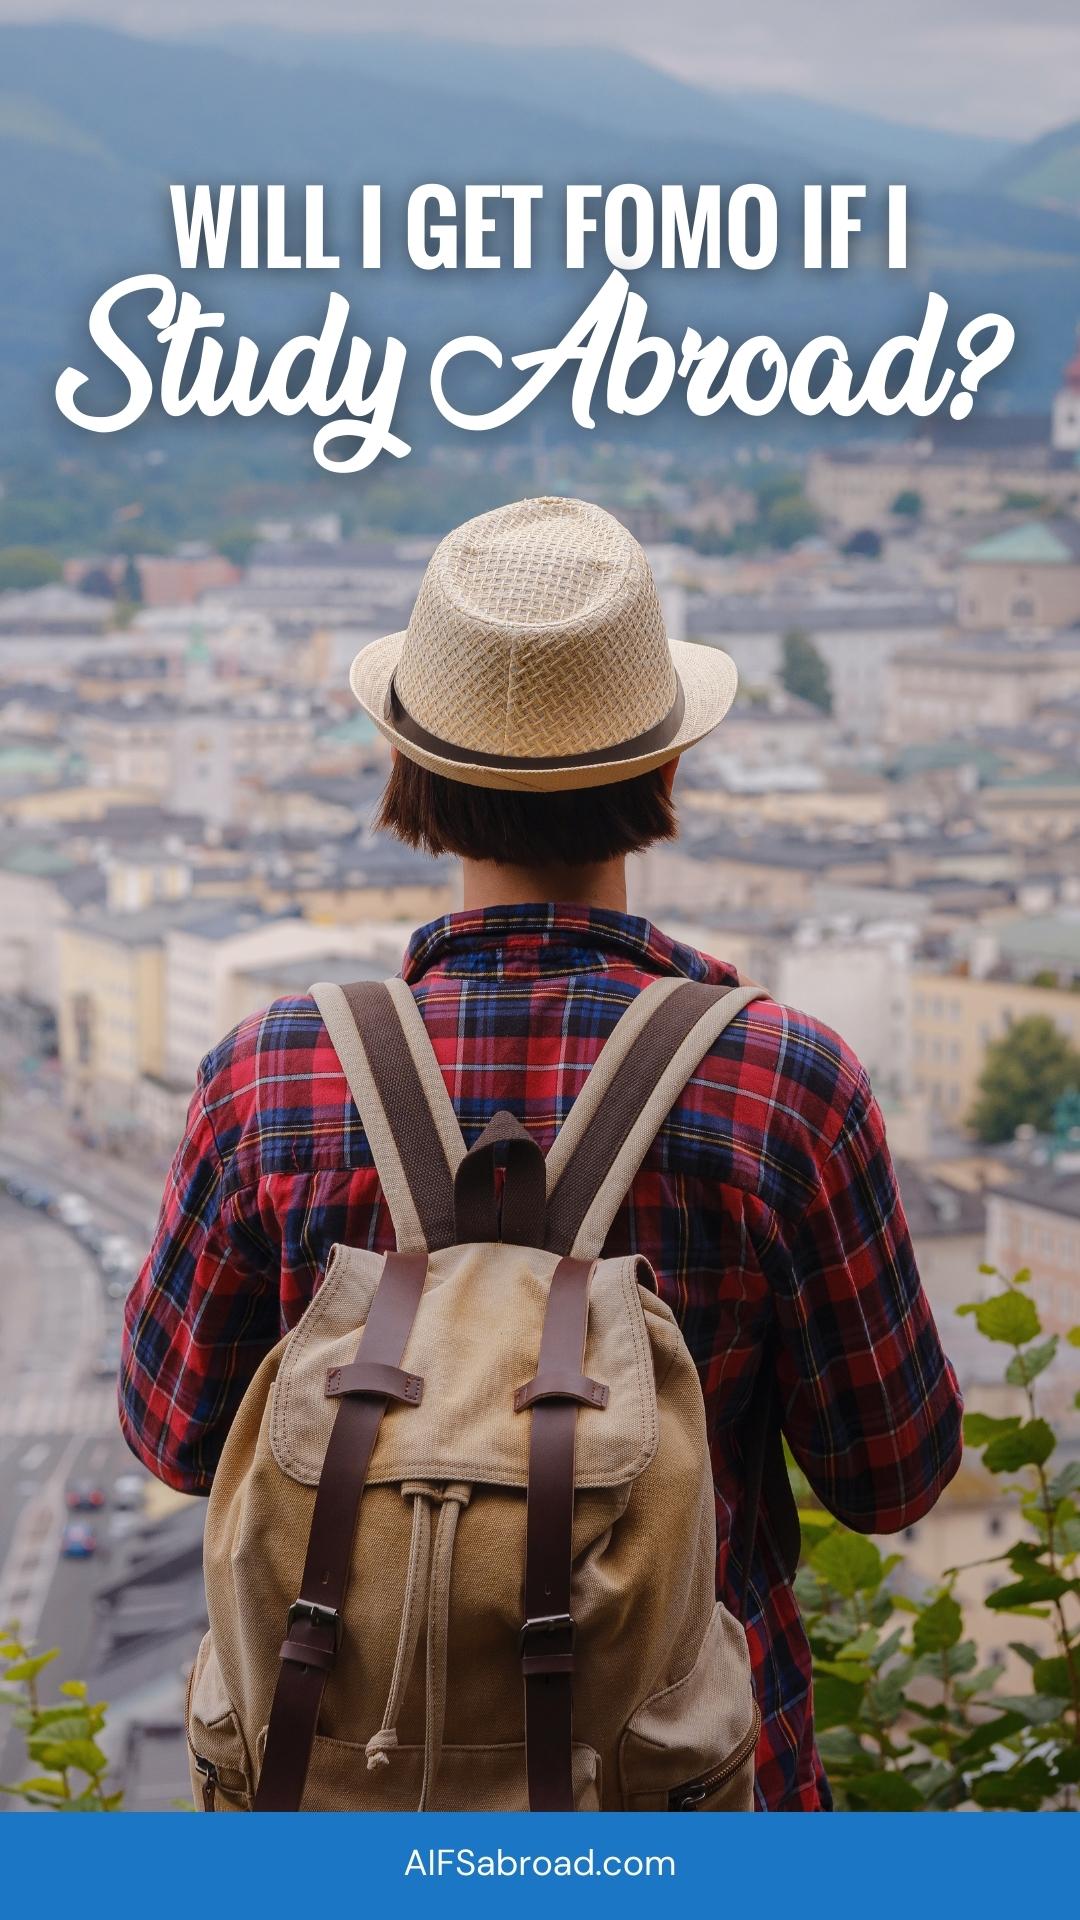 Traveler overlooking a cityscape with text "Will I Get FOMO if I Study Abroad?" 